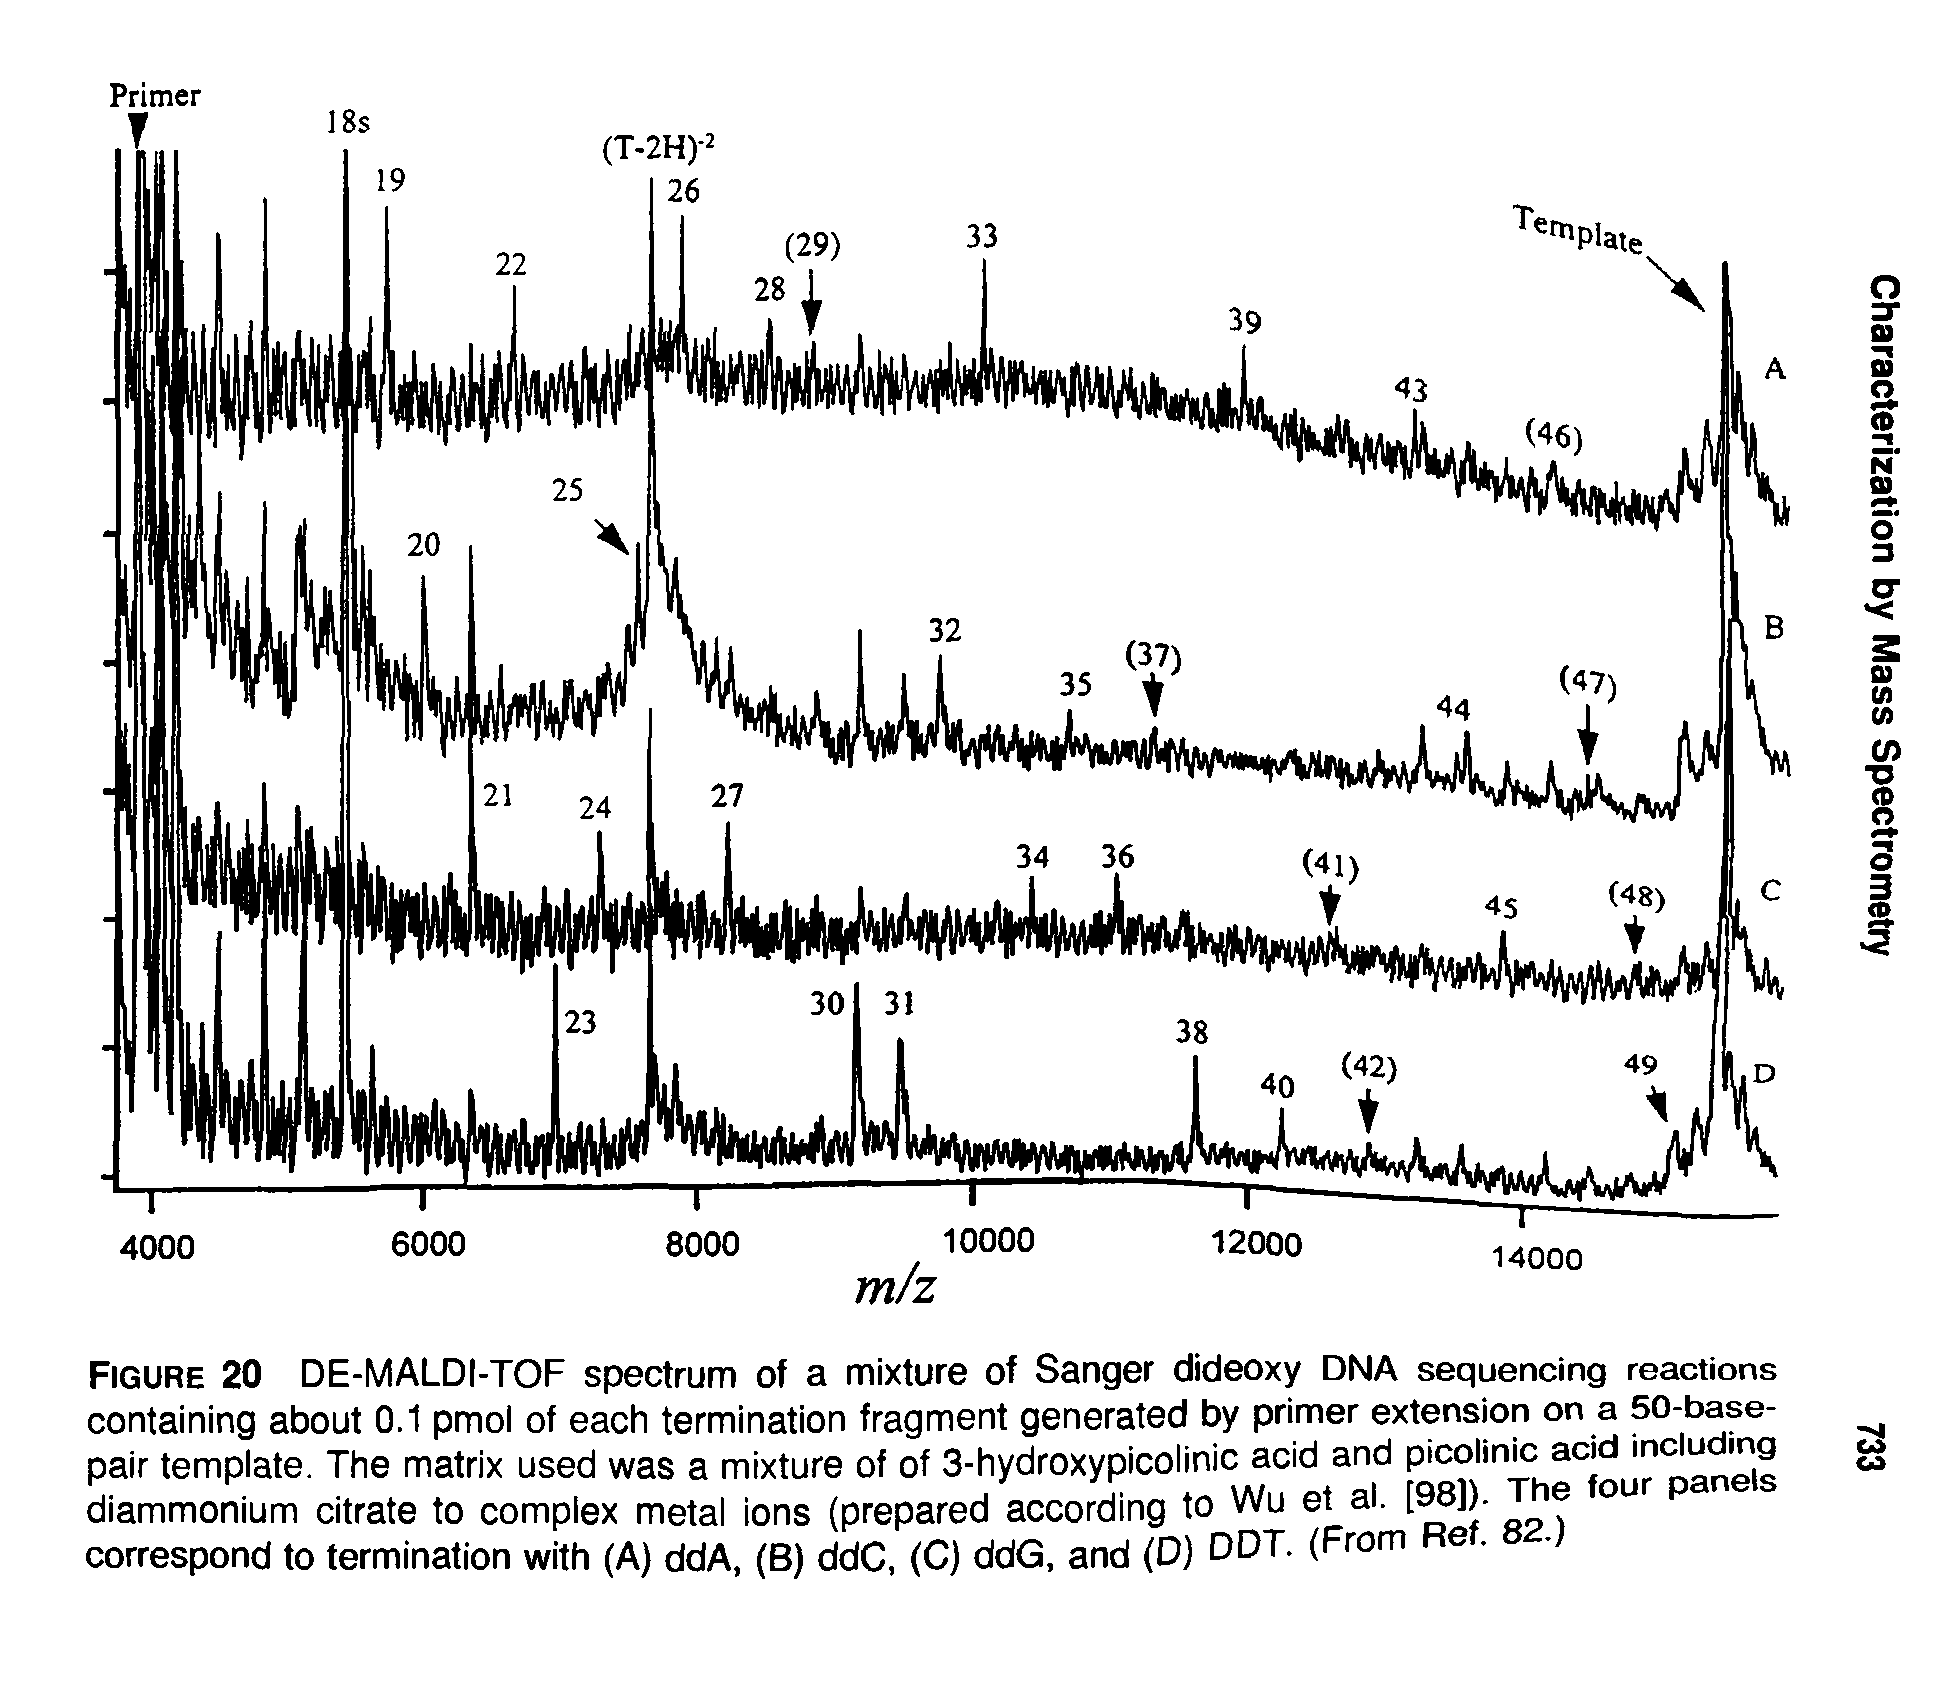 Figure 20 DE-MALDI-TOF spectrum of a mixture of Sanger dideoxy DNA sequencing reactions containing about 0.1 pmol of each termination fragment generated by primer extension on a 50-base-pair template. The matrix used was a mixture of of 3-hydroxypicolinic acid and picolinic acid including diammonium citrate to complex metal ions (prepared according to Wu et al. [98]). The four panels correspond to termination with (A) ddA. (B) ddC, (C) ddG, and (D) DDT. (From Ref. 82.)...